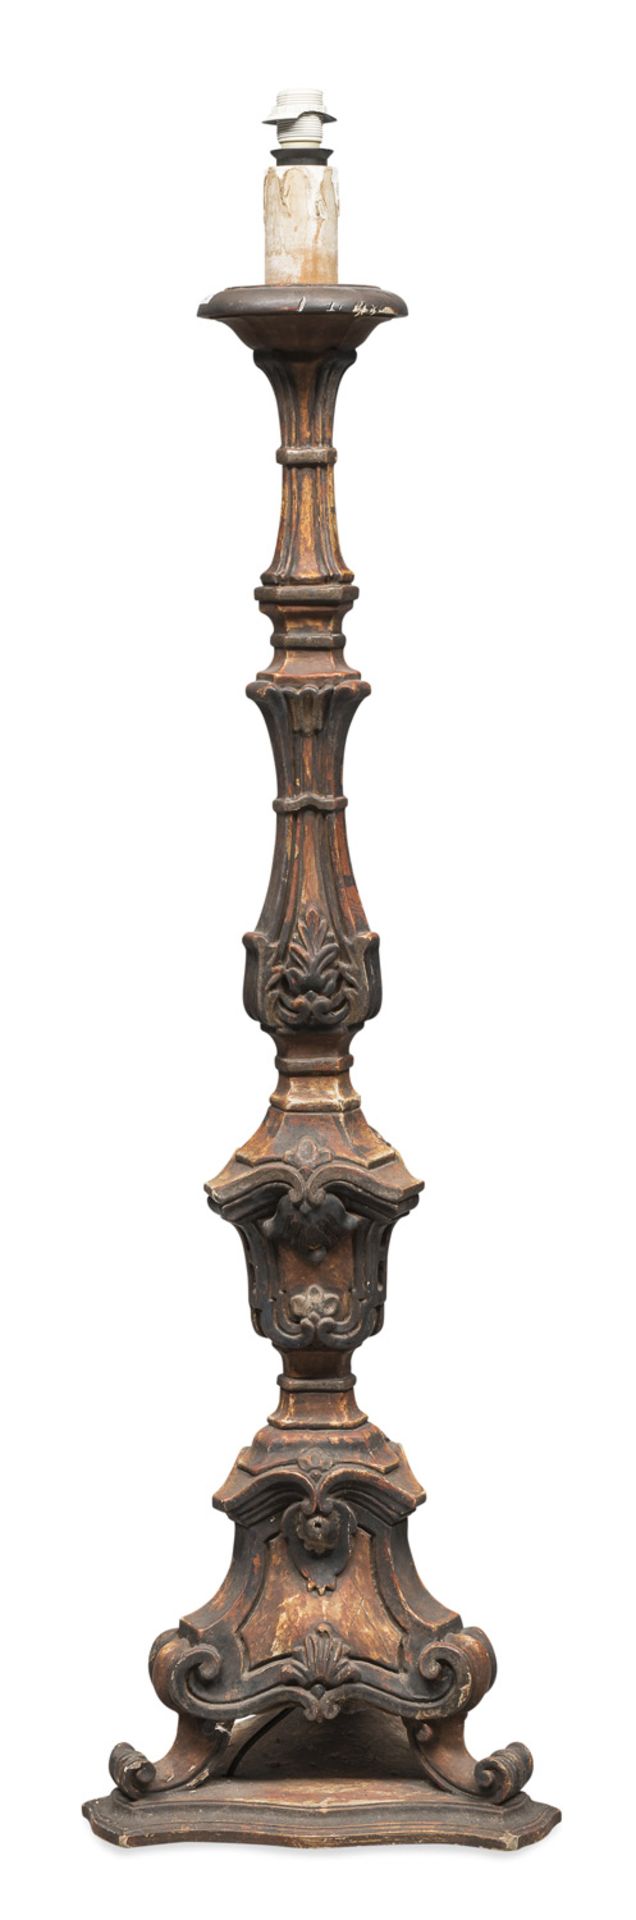 FLOOR LAMP IN CARVED WOOD 18th CENTURY